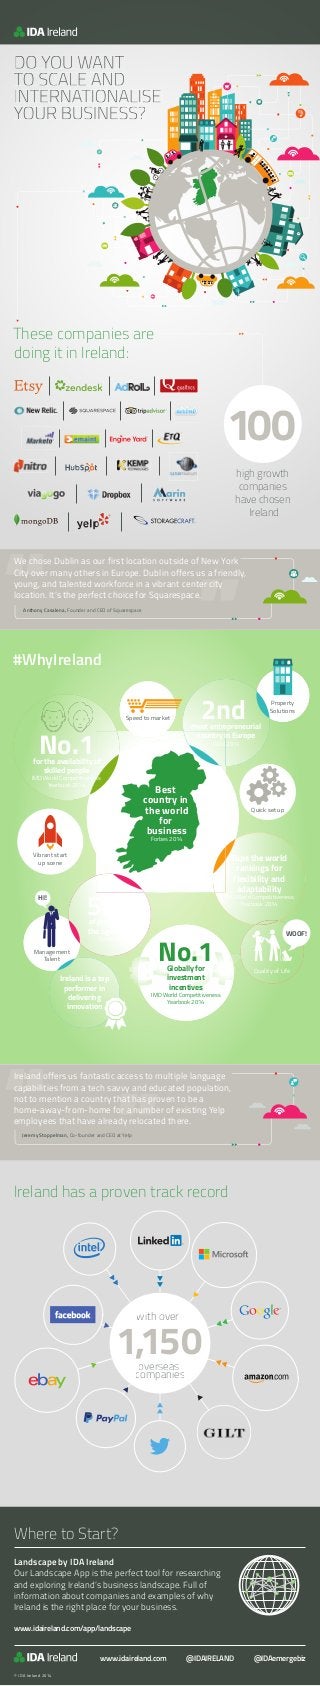 DO YOU WANT
TO SCALE AND
INTERNATIONALISE
YOUR BUSINESS?
These companies are
doing it in Ireland:
#WhyIreland
high growth
companies
have chosen
Ireland
Landscape by IDA Ireland
Our Landscape App is the perfect tool for researching
and exploring Ireland’s business landscape. Full of
information about companies and examples of why
Ireland is the right place for your business.
www.idaireland.com/app/landscape
Ireland has a proven track record
Where to Start?
We chose Dublin as our first location outside of New York
City over many others in Europe. Dublin offers us a friendly,
young, and talented workforce in a vibrant center city
location. It’s the perfect choice for Squarespace.
100
Anthony Casalena, Founder and CEO of Squarespace
Ireland offers us fantastic access to multiple language
capabilities from a tech savvy and educated population,
not to mention a country that has proven to be a
home-away-from-home for a number of existing Yelp
employees that have already relocated there.
Jeremy Stoppelman, Co-founder and CEO at Yelp
1,150overseasoverseasoverseasoverseas
companiescompaniescompaniescompanies
with overwith overwith overwith over
@IDAIRELANDwww.idaireland.com
© IDA Ireland 2014
@IDAemergebiz
Quality of Life
Speed to market
Management
Talent
Quick set up
Vibrant start
up scene
Best
country in
the world
for
business
Forbes 2014
No.1for the availability of
skilled people
IMD World Competitiveness
Yearbook 2014
50%of pop under
the age of 35
Eurostat
2ndmost entrepreneurial
country in Europe
GEM 2014
Ireland is a top
performer in
delivering
innovation
Tops the world
rankings for
flexibility and
adaptability
IMD World Competitiveness
Yearbook 2014
Property
Solutions
WOOF!
HI!
No.1Globally for
investment
incentives
IMD World Competitiveness
Yearbook 2014
 